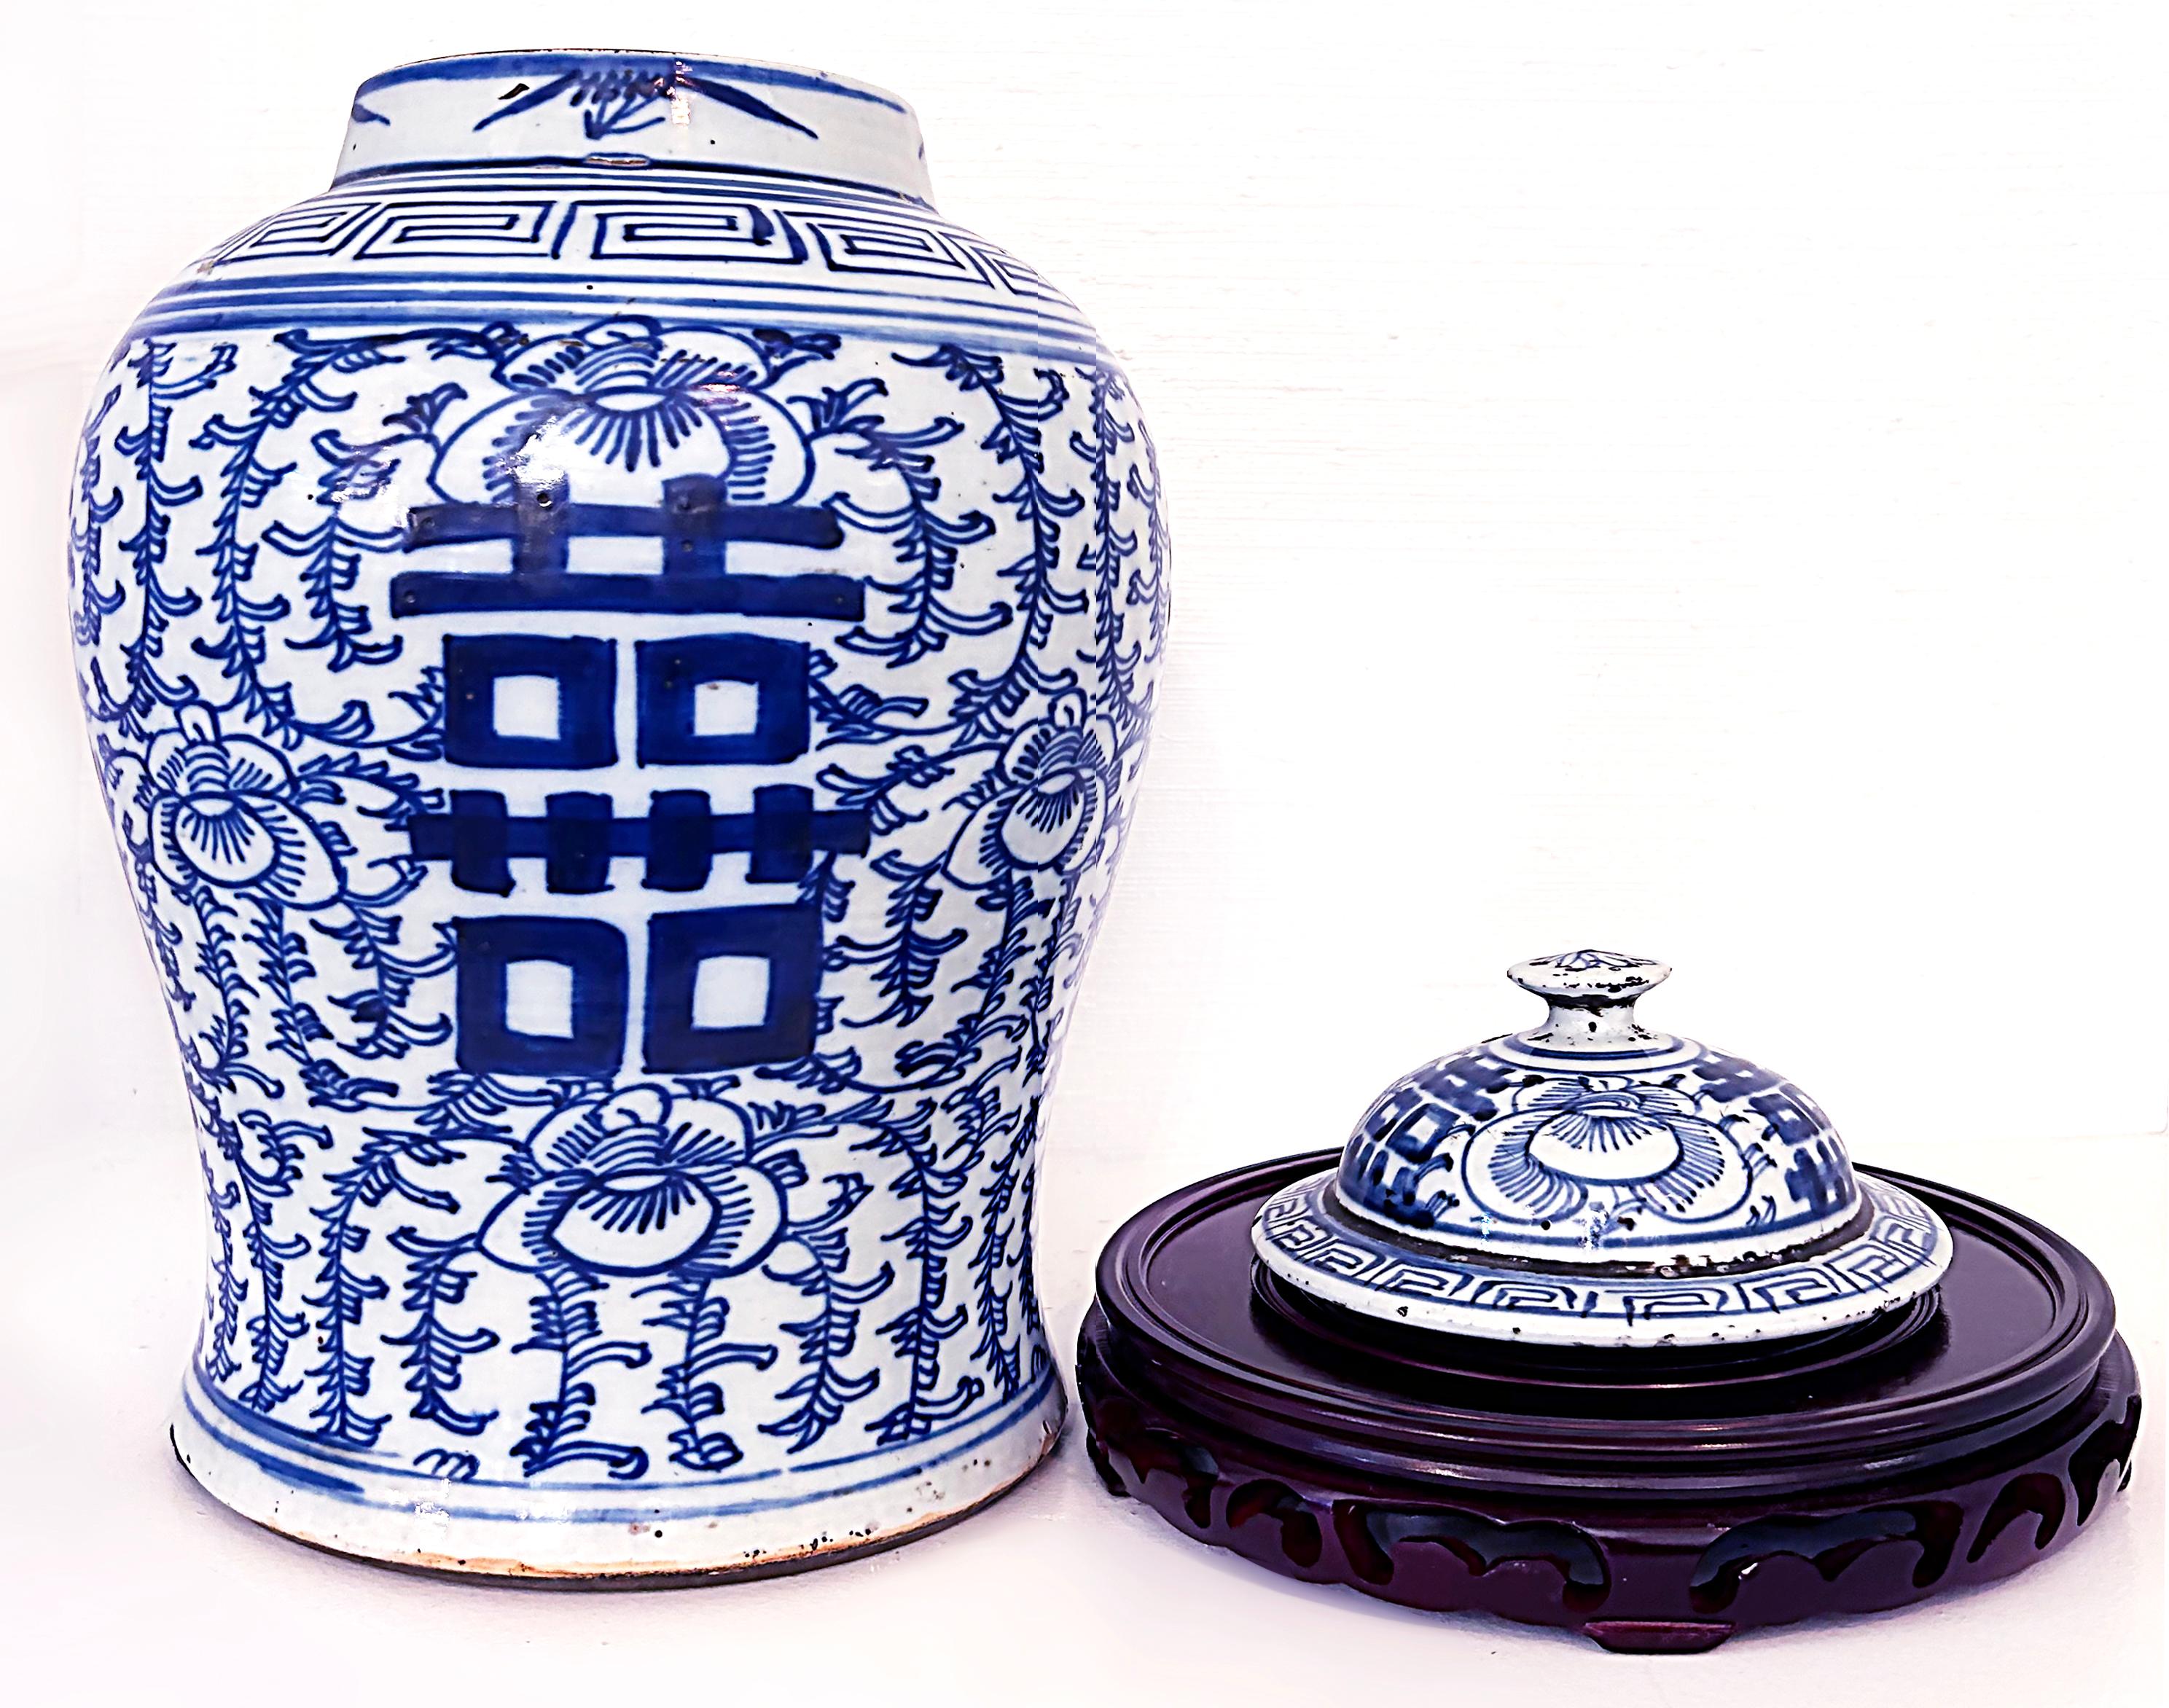 Chinese Blue & White Porcelain Covered Ginger Jar on Stand

Offered for sale is a Chinese blue and white porcelain ginger jar with a lid. The jar is presented on an ebonized carved wood base. The jar has Chinese figures glazed on the front and